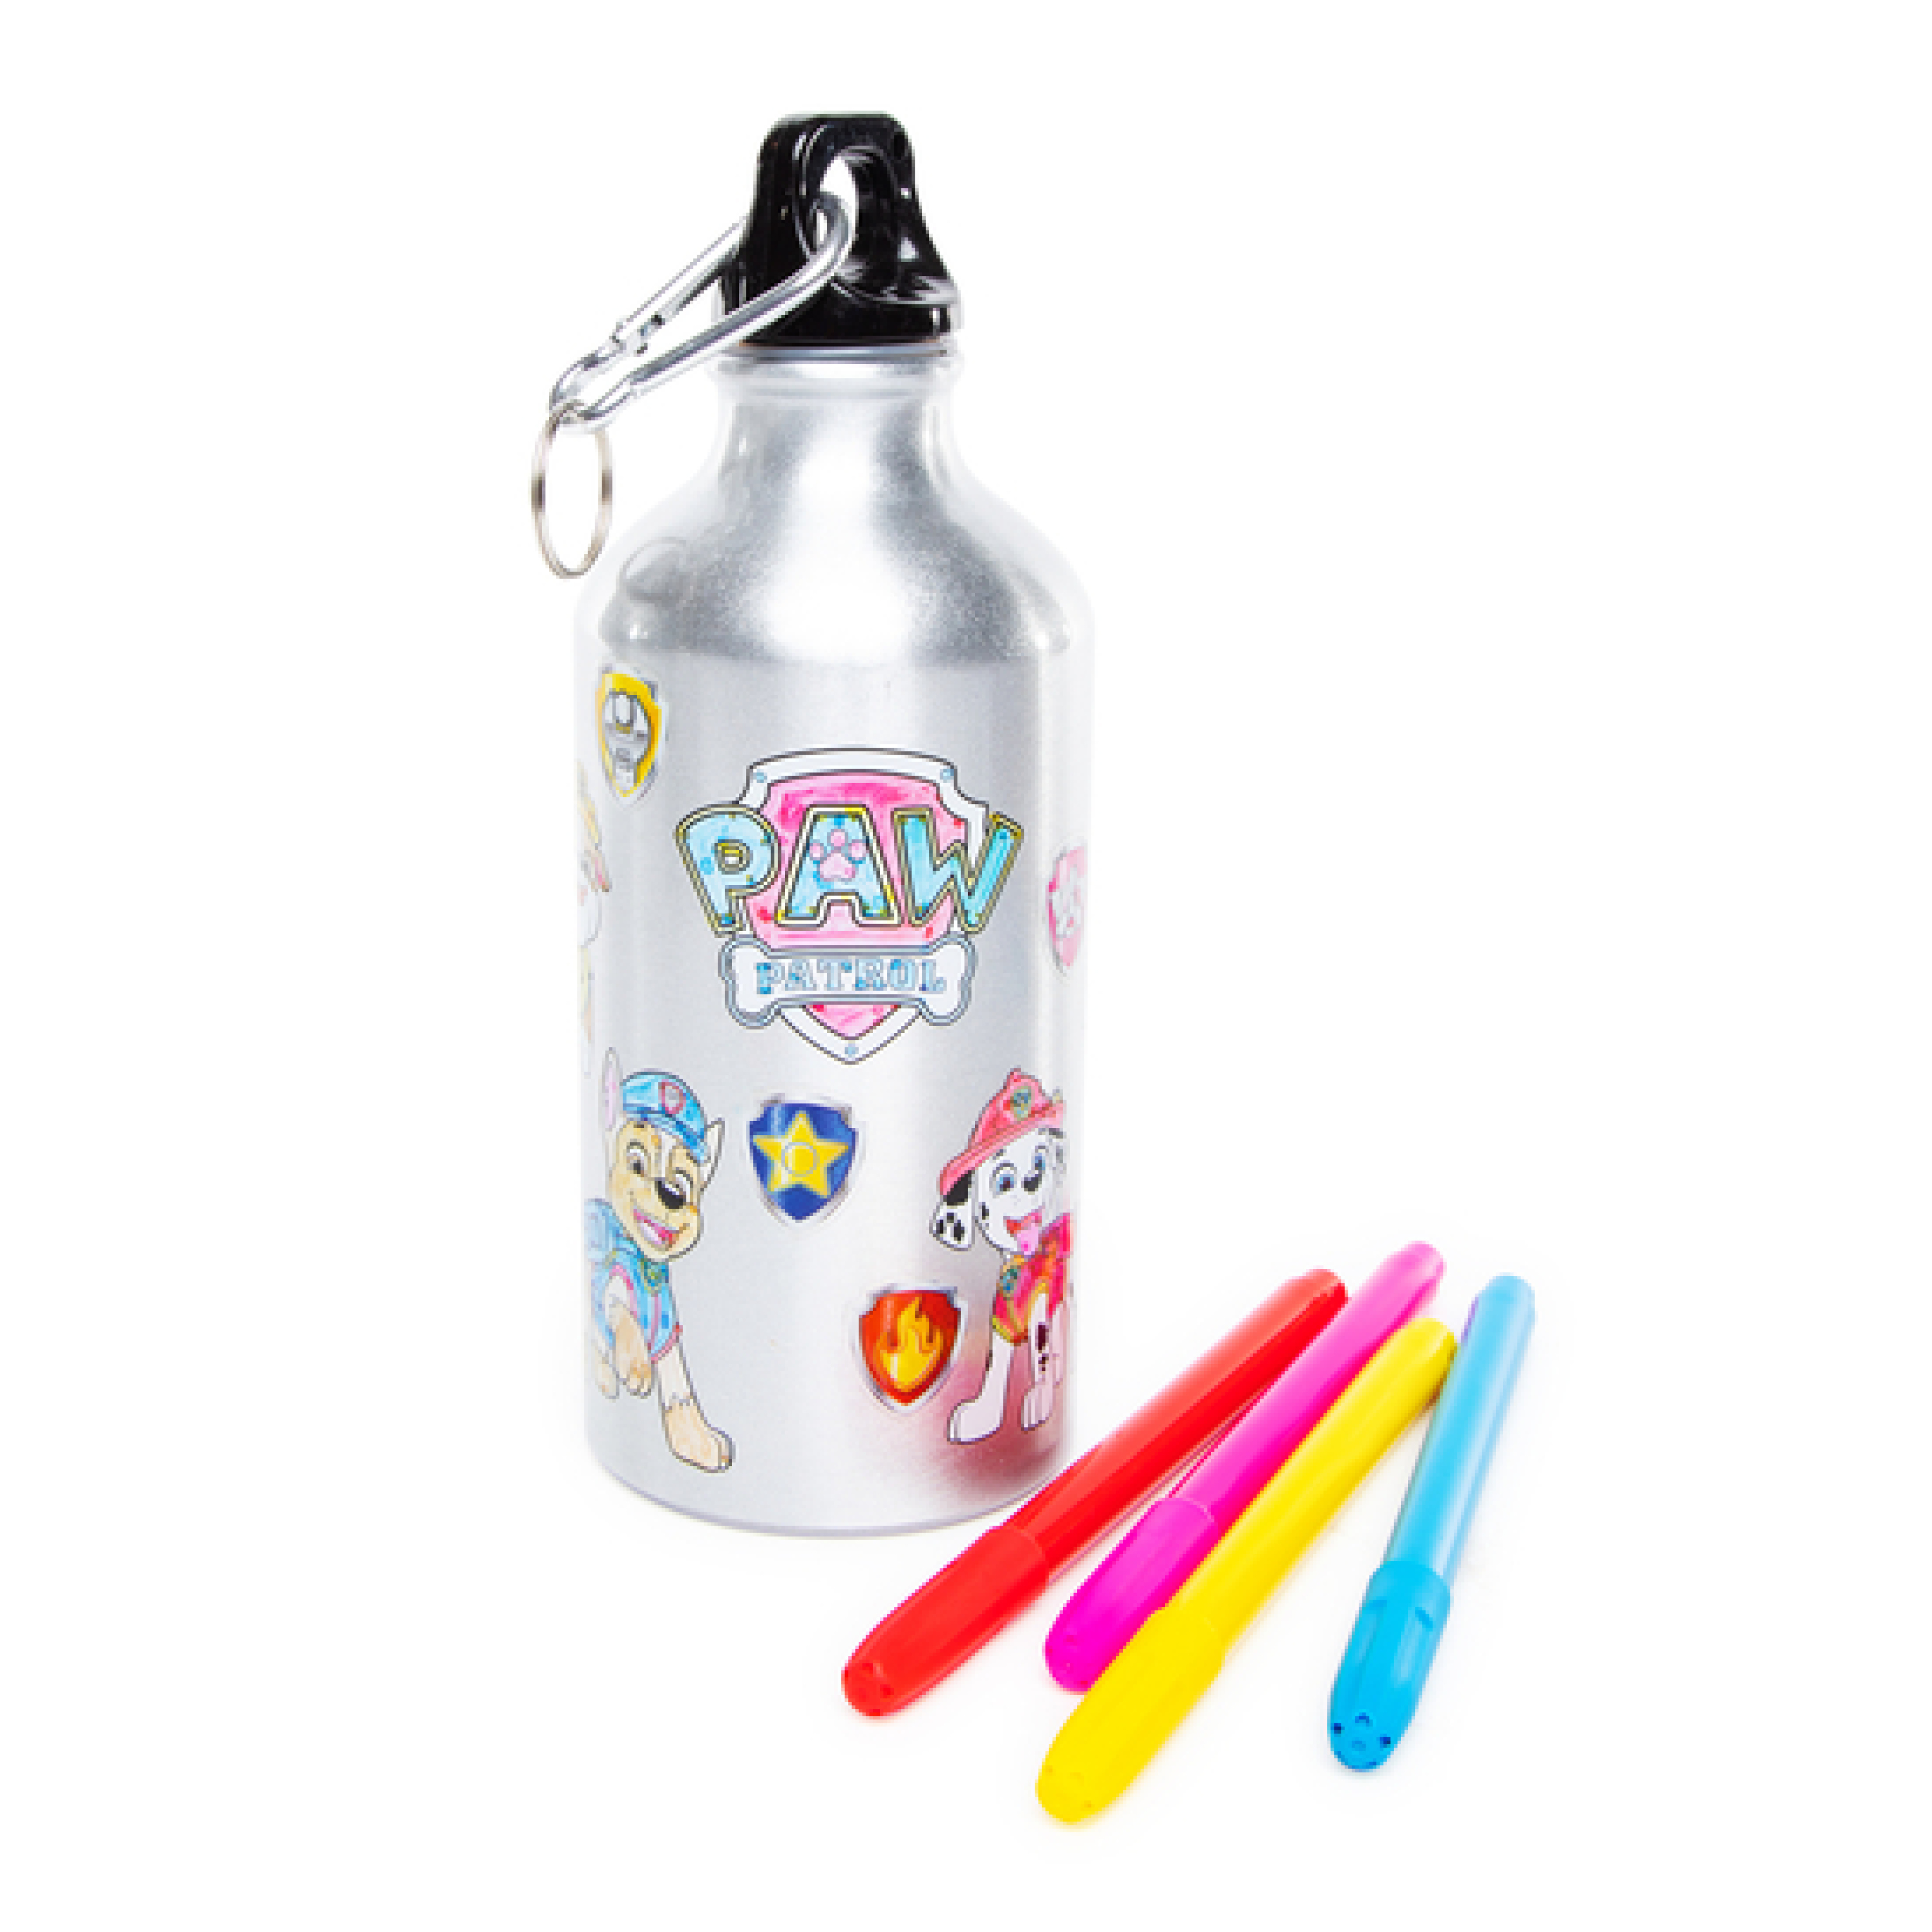 Draw your own Paw Patrol Water Bottle Activity Kit - Well Played